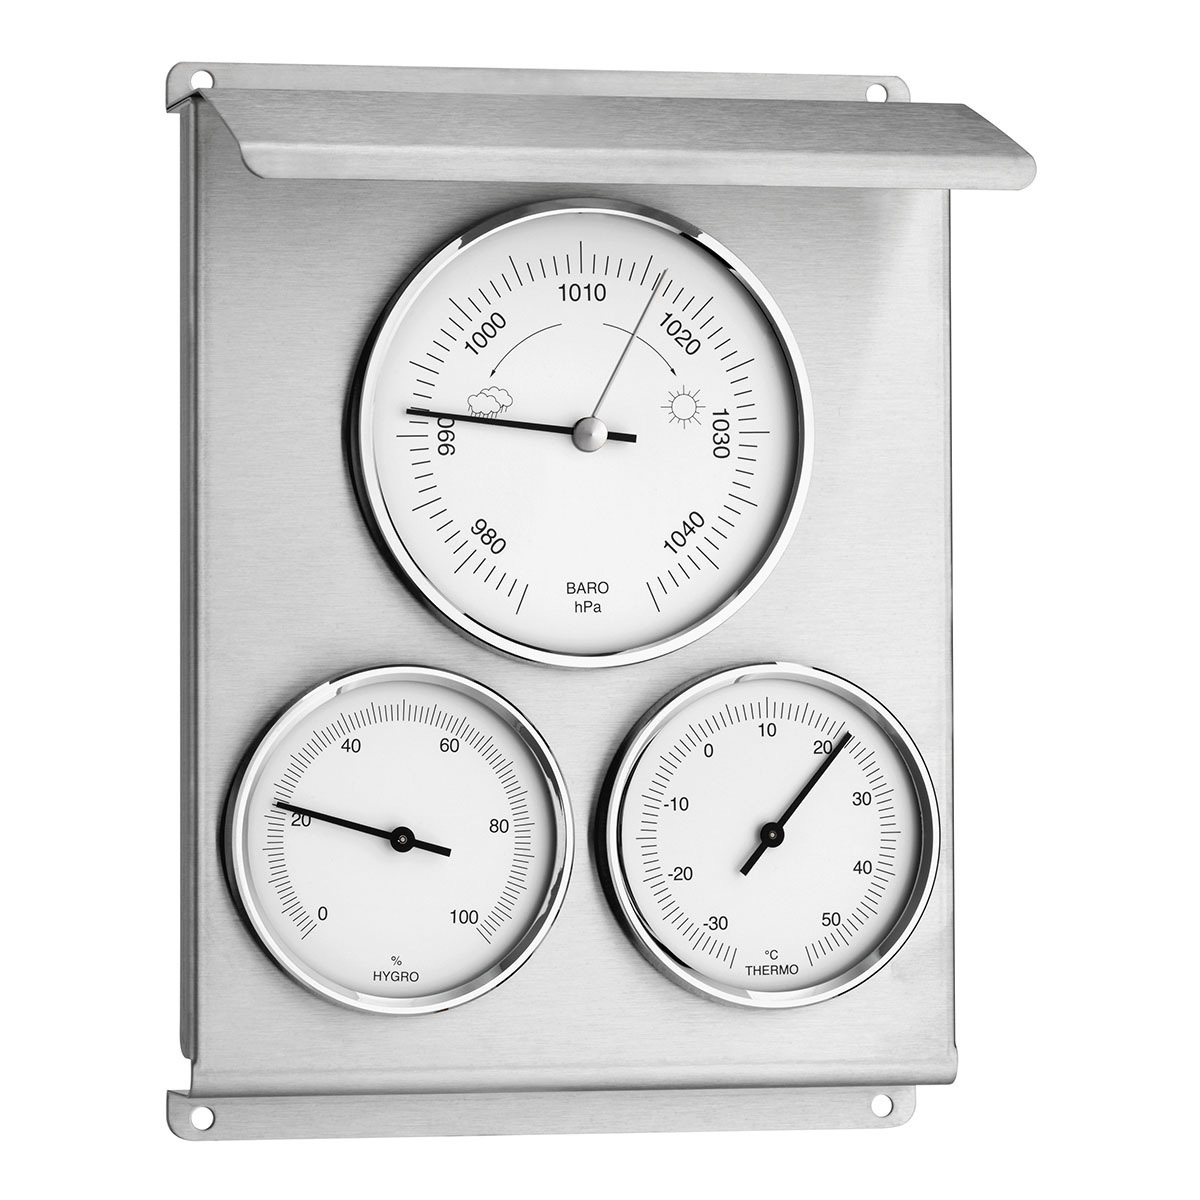 Analogue outdoor weather station made of stainless steel